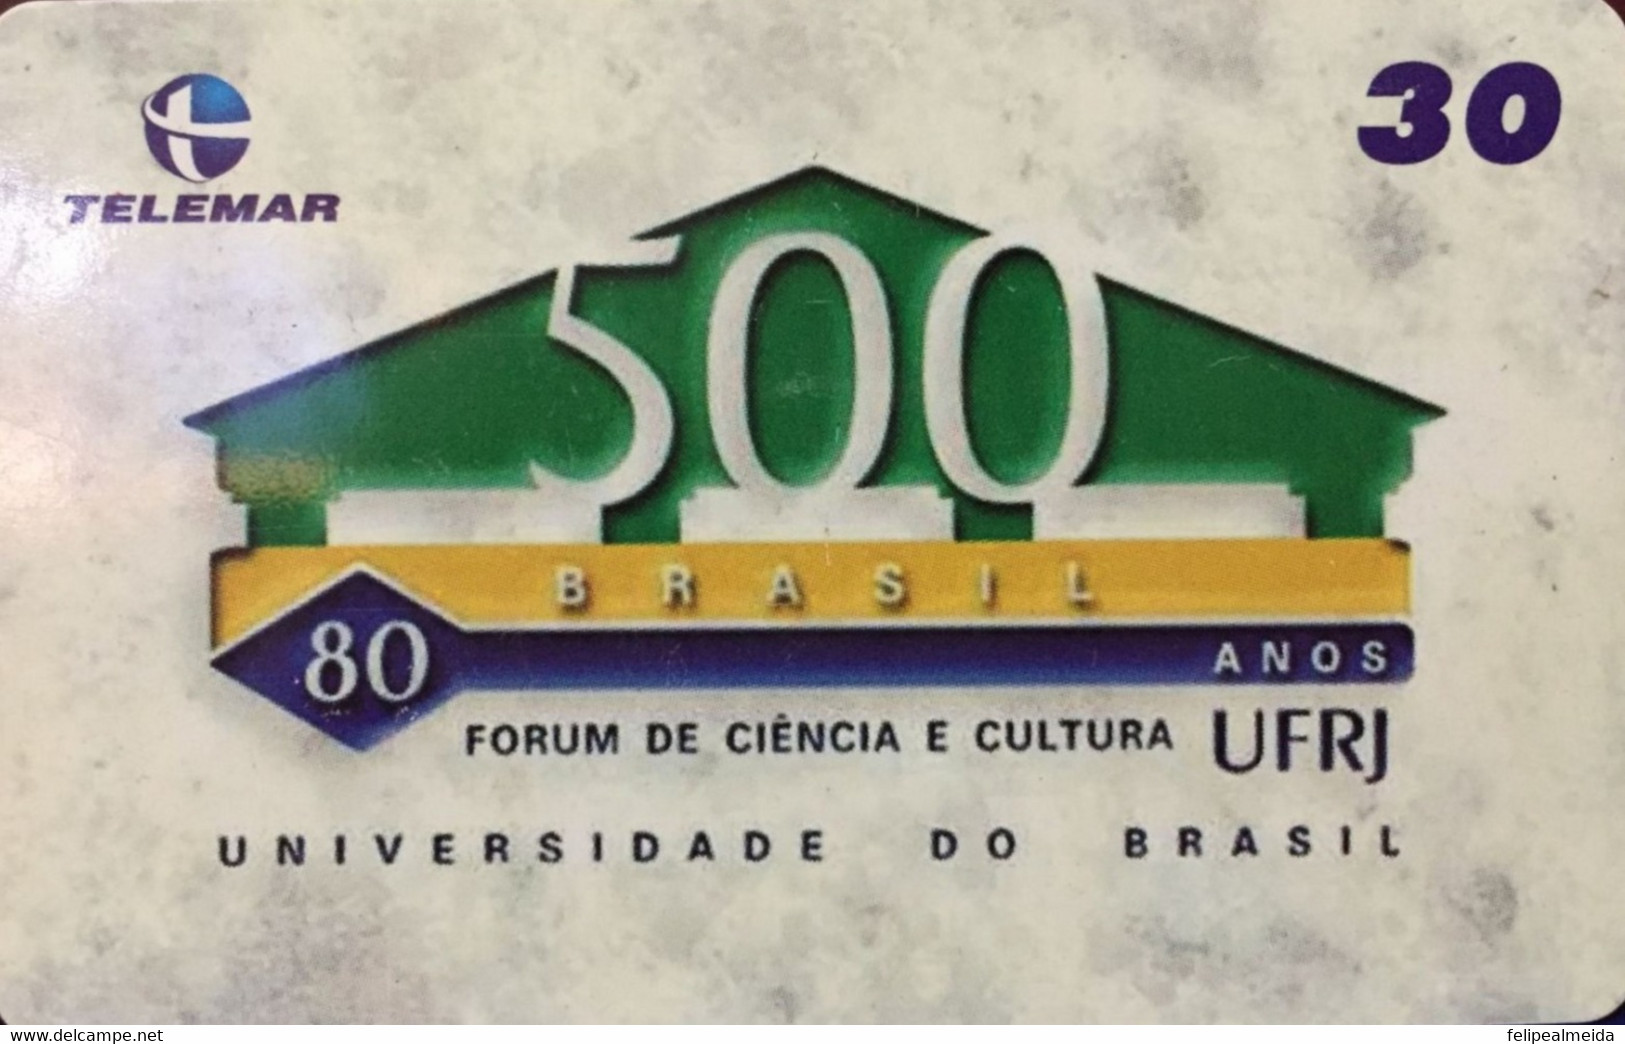 Phone Card Manufactured By Telemar In 2000 - 500 Years Of Brazil - Permanent Seminar - Science And Culture Forum - Feder - Culture